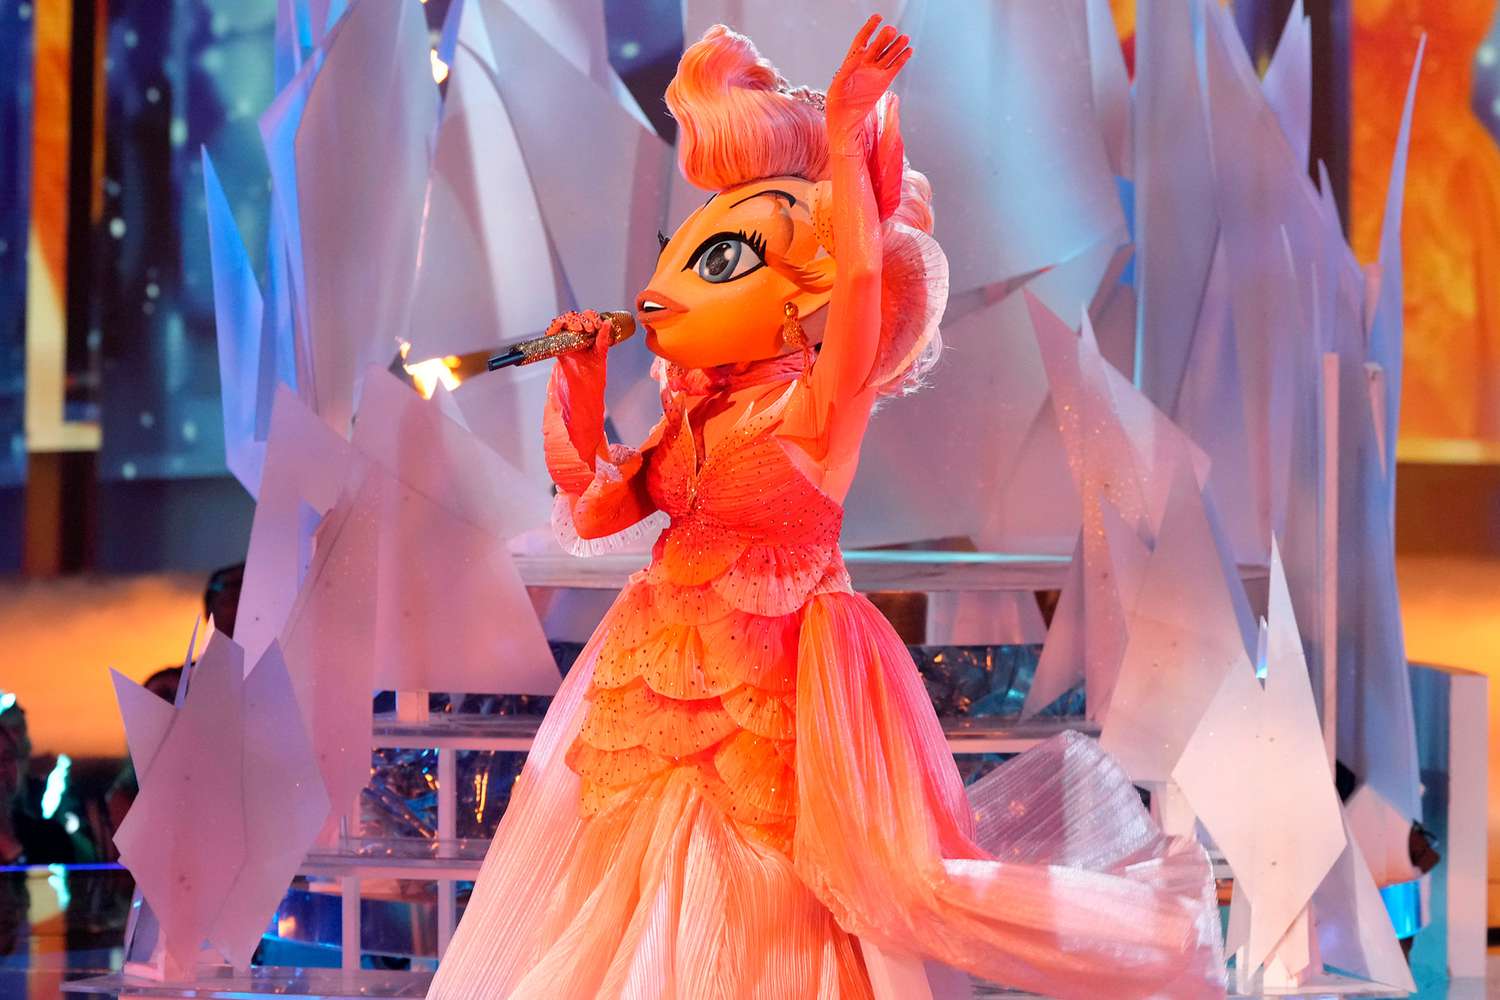 'The Masked Singer' winner Goldfish has advice for young stars: 'Fame itself isn't the reason to do things'